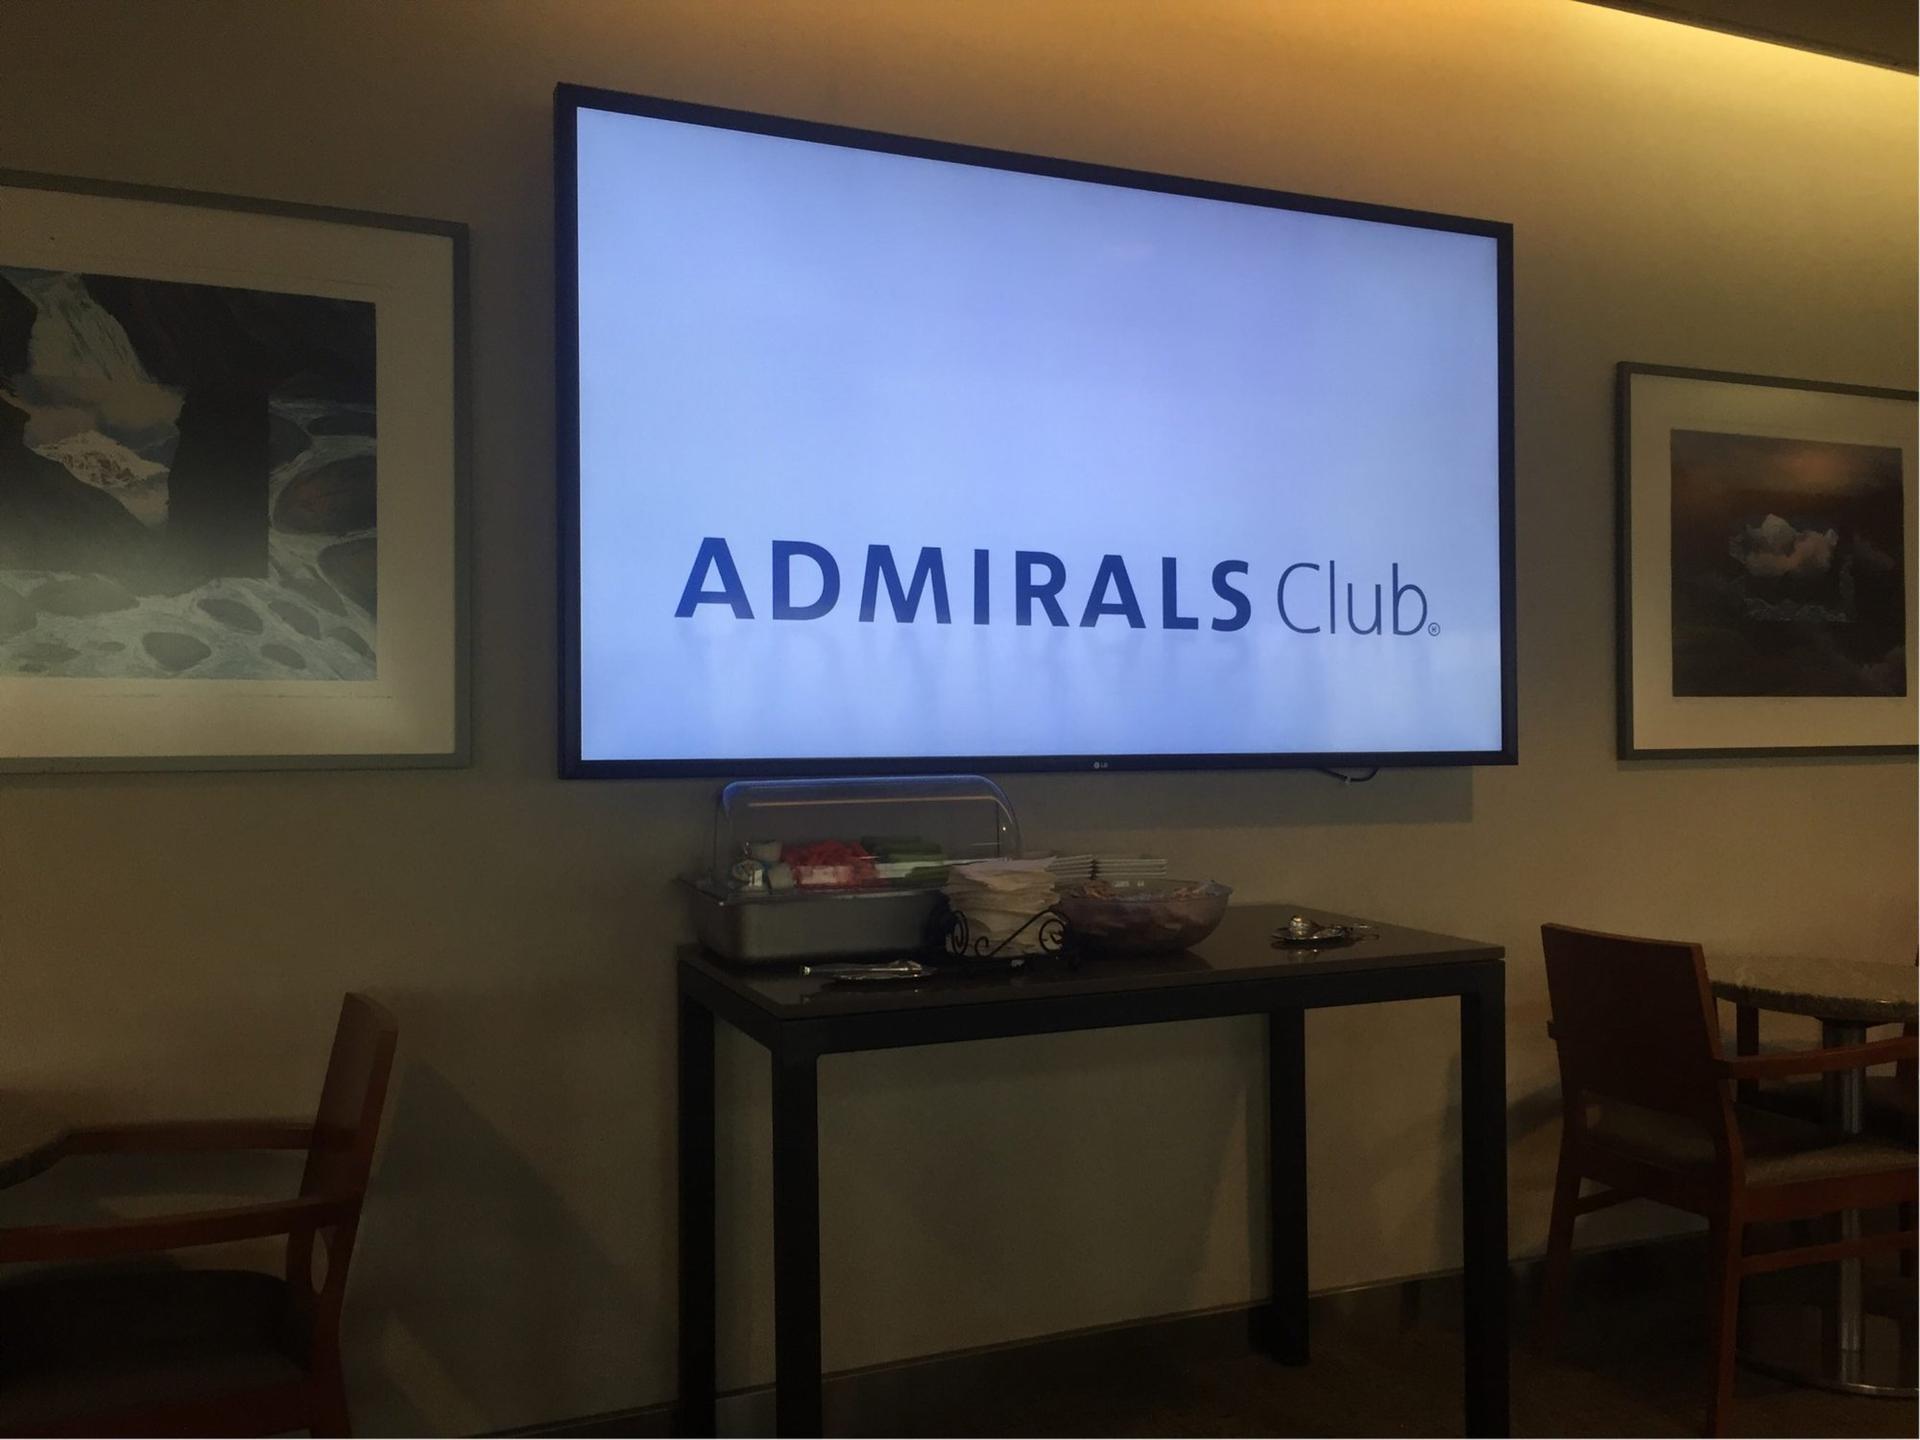 American Airlines Admirals Club image 45 of 48